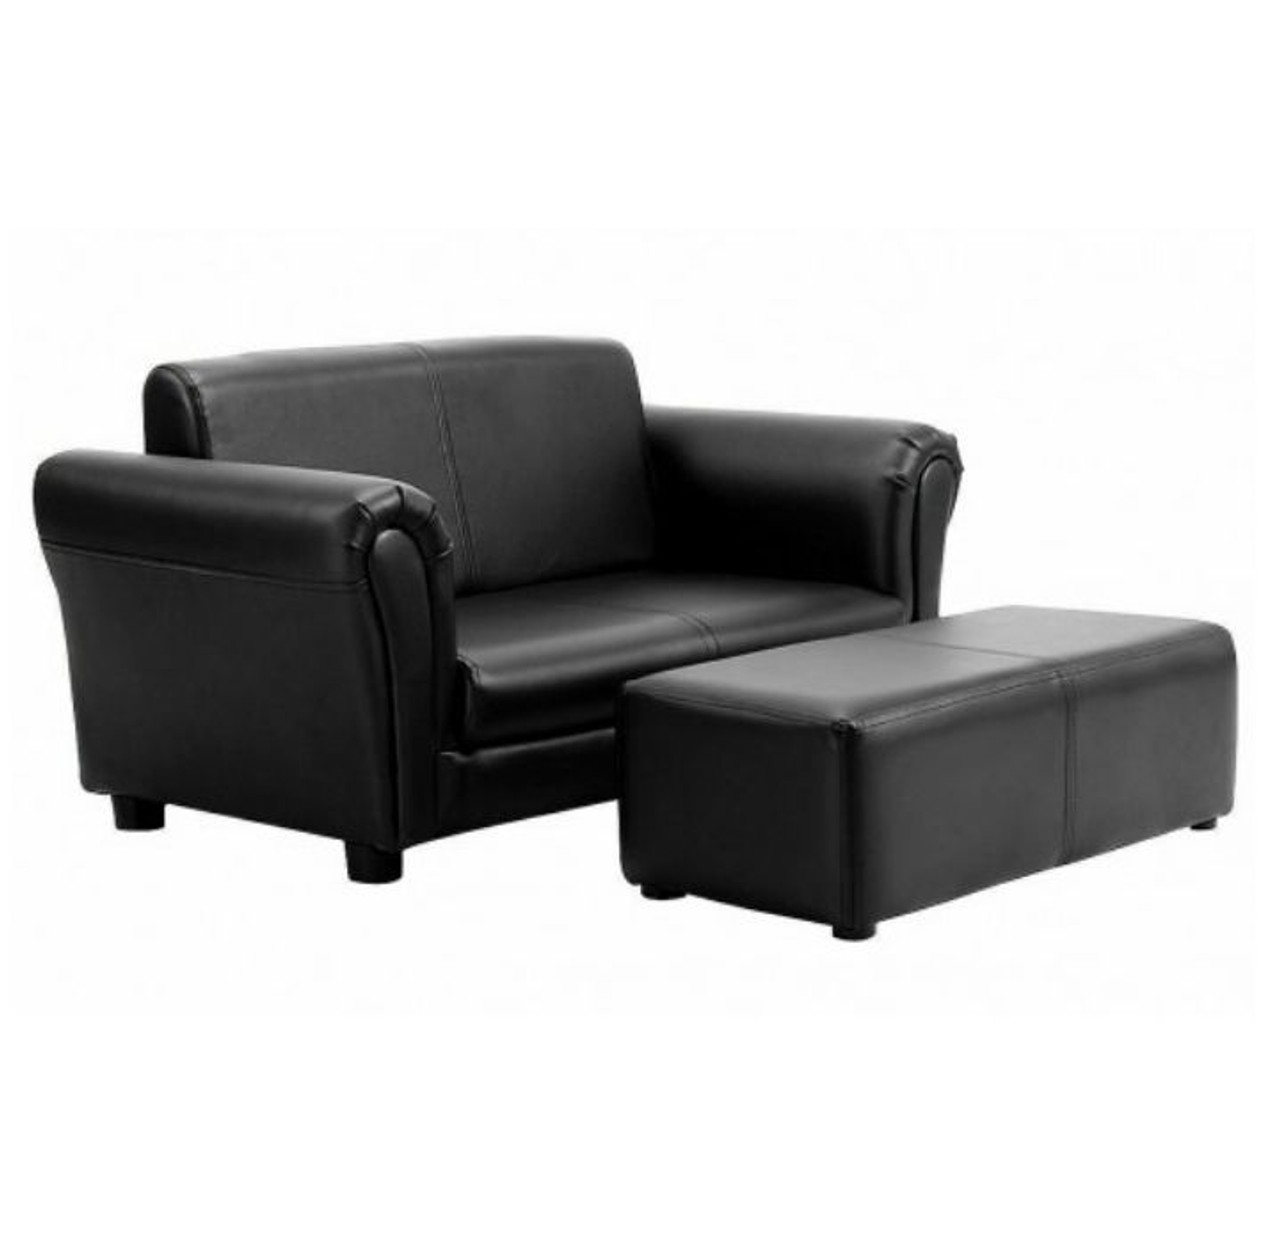 Kids' Faux Leather Sofa with Ottoman product image